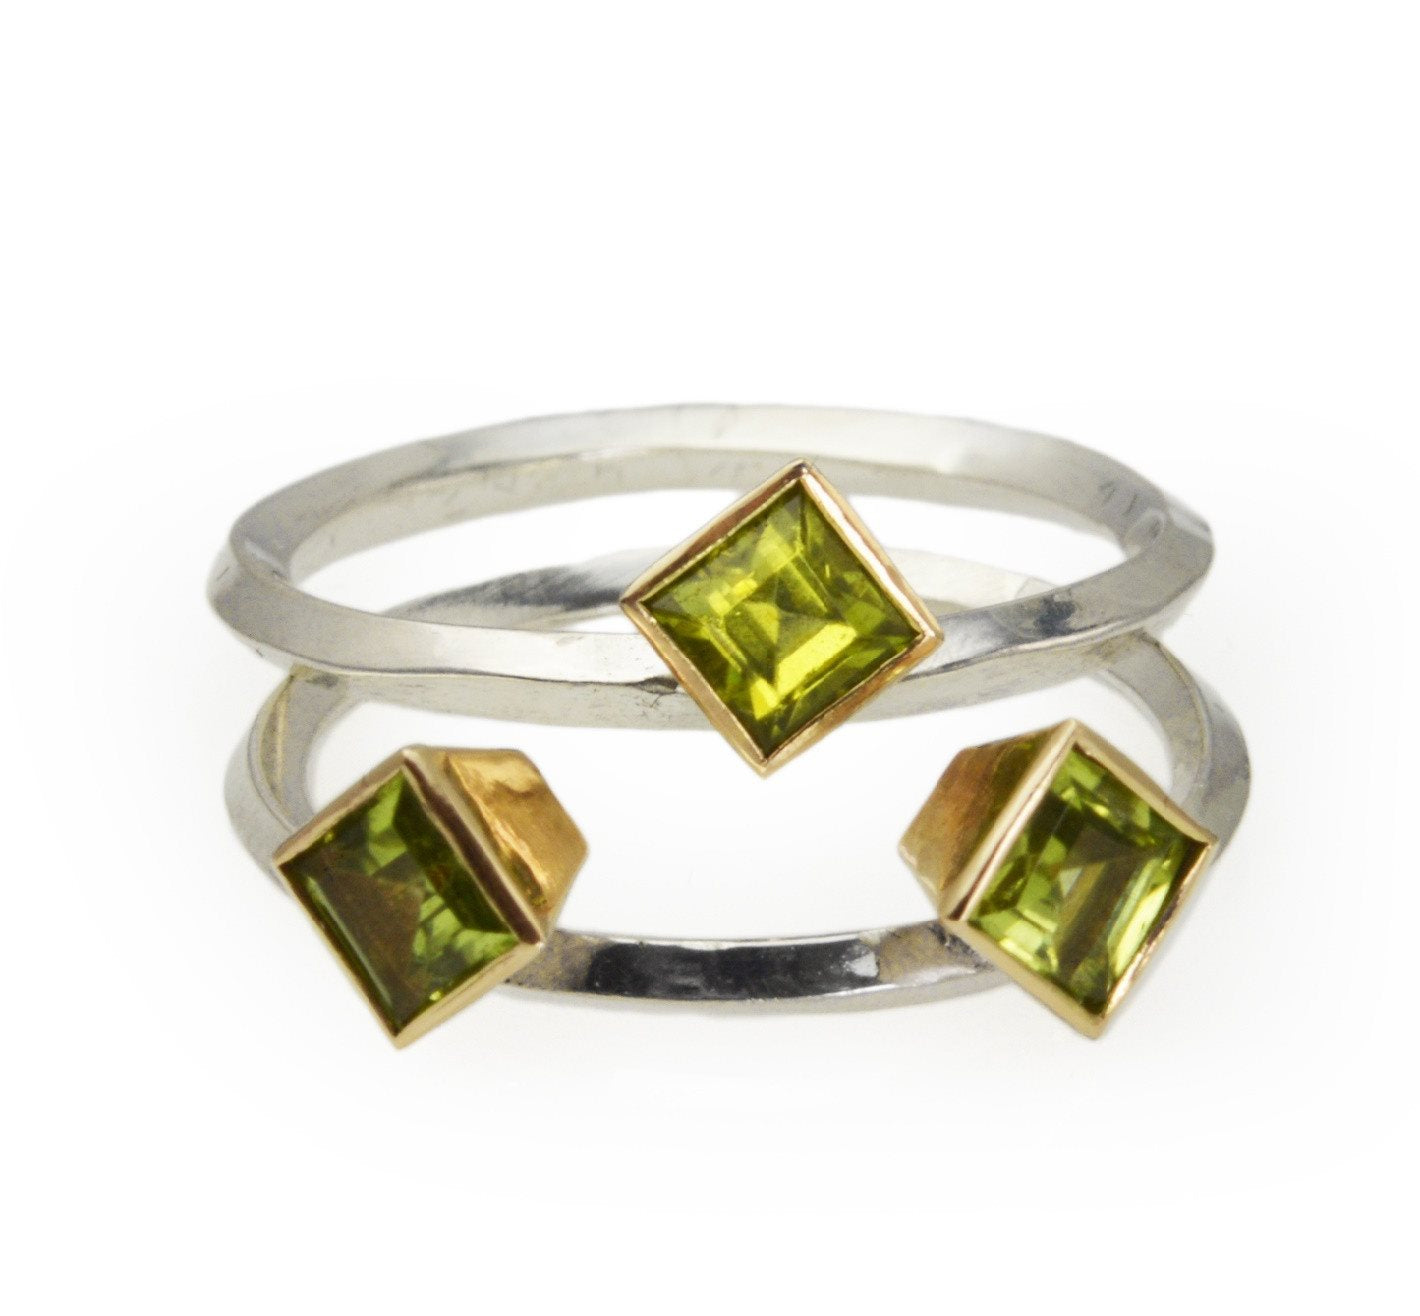 Two Square Peridots set in 14k Gold Geometric Stacking Ring